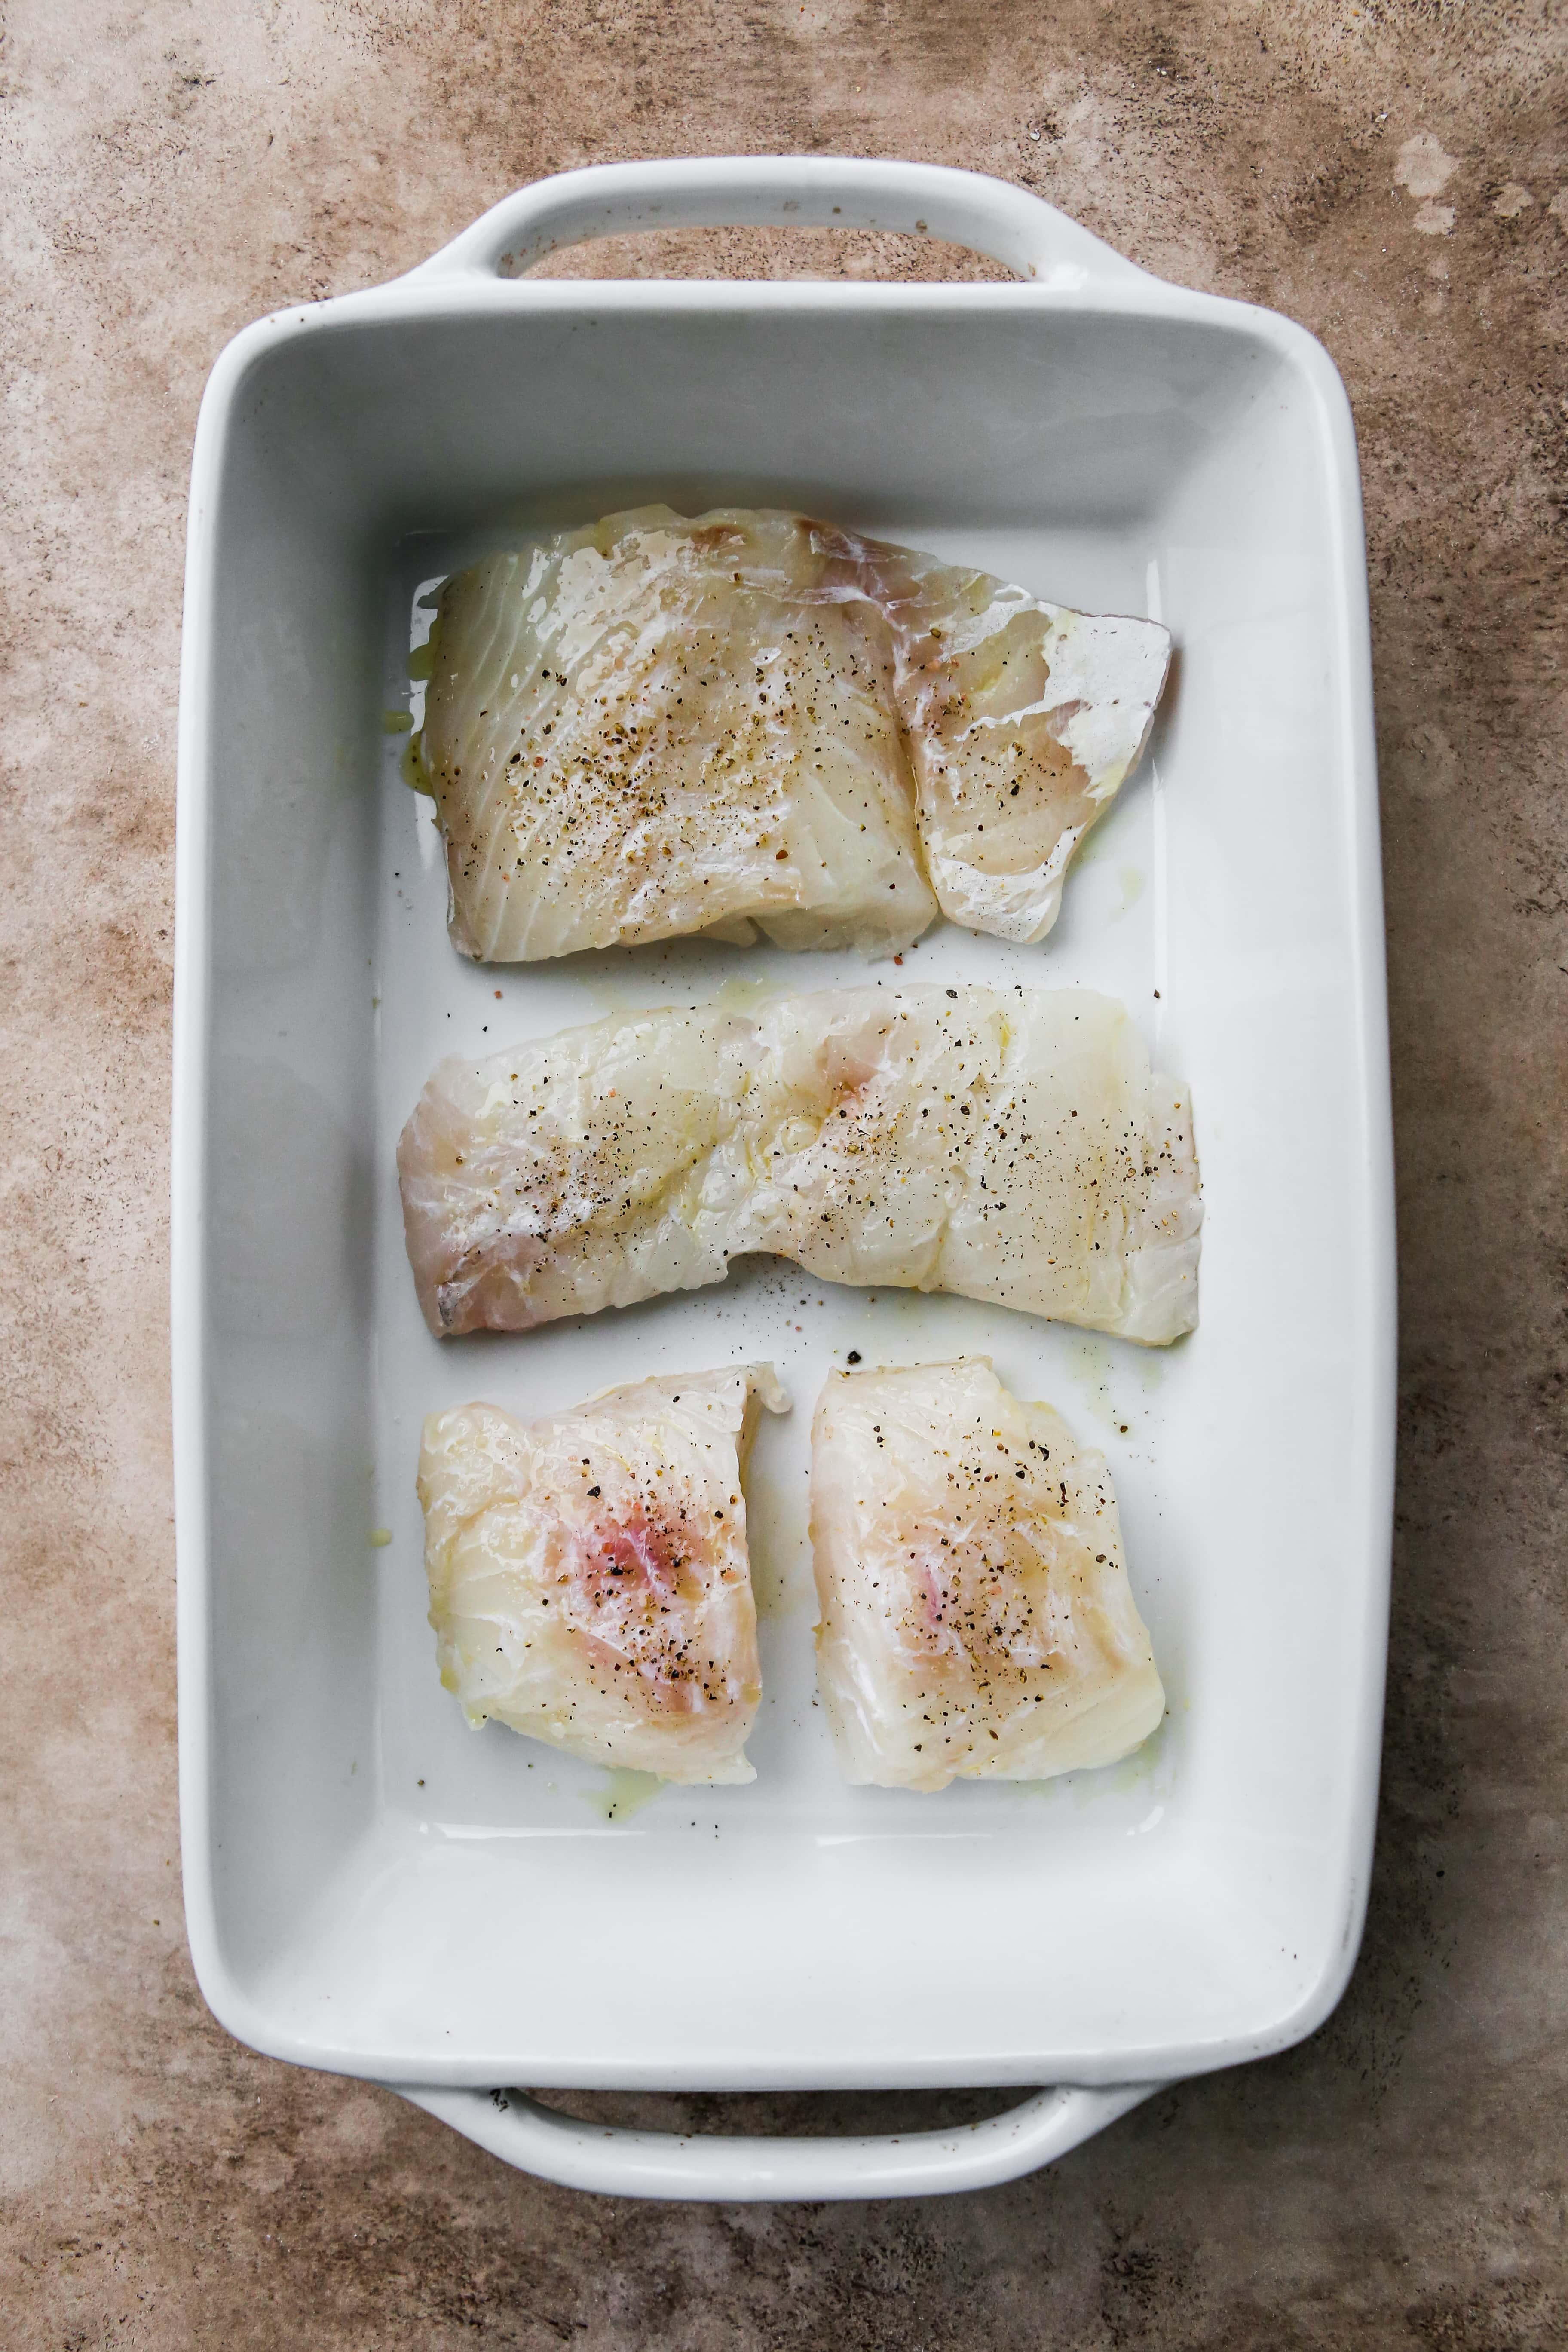 Uncooked cod fillets in a white baking dish.